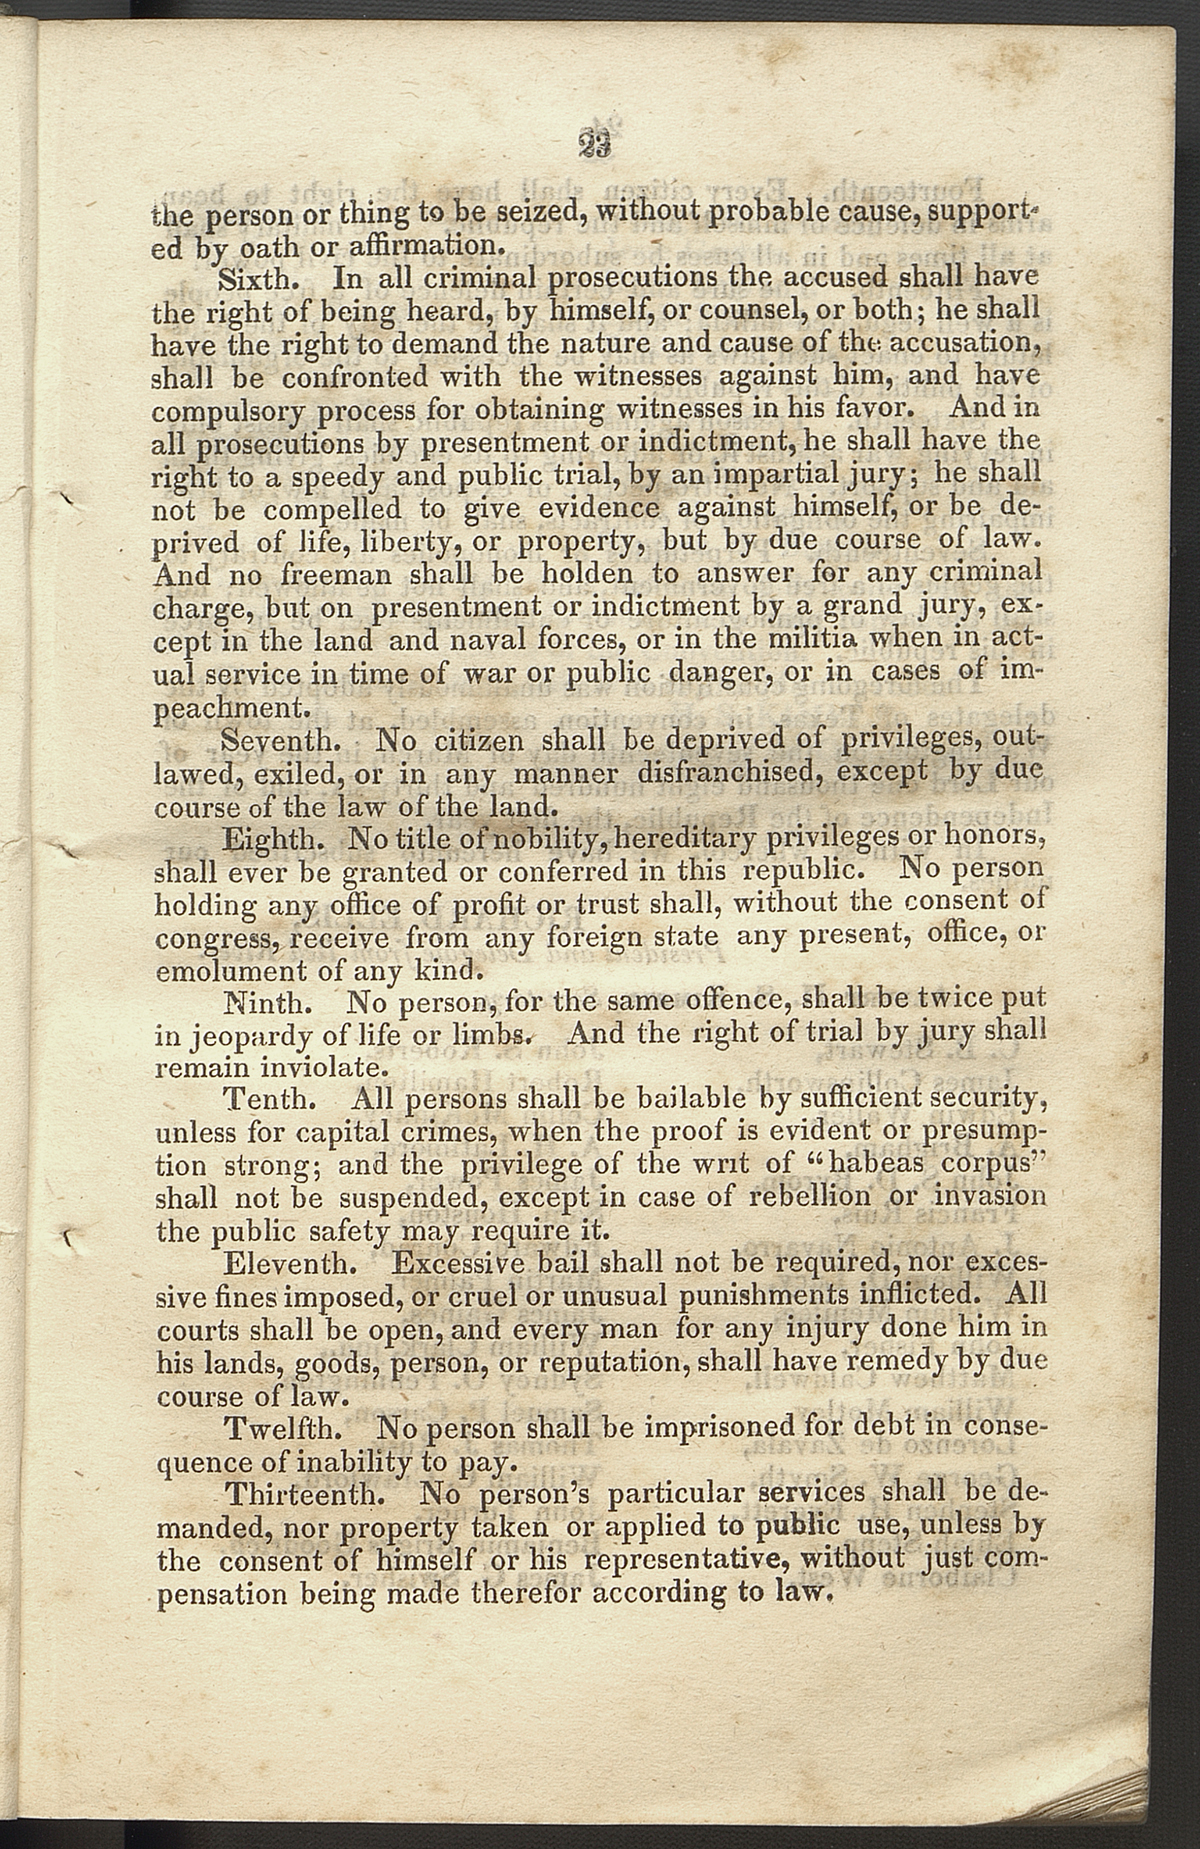 Declaration of Rights, page 23